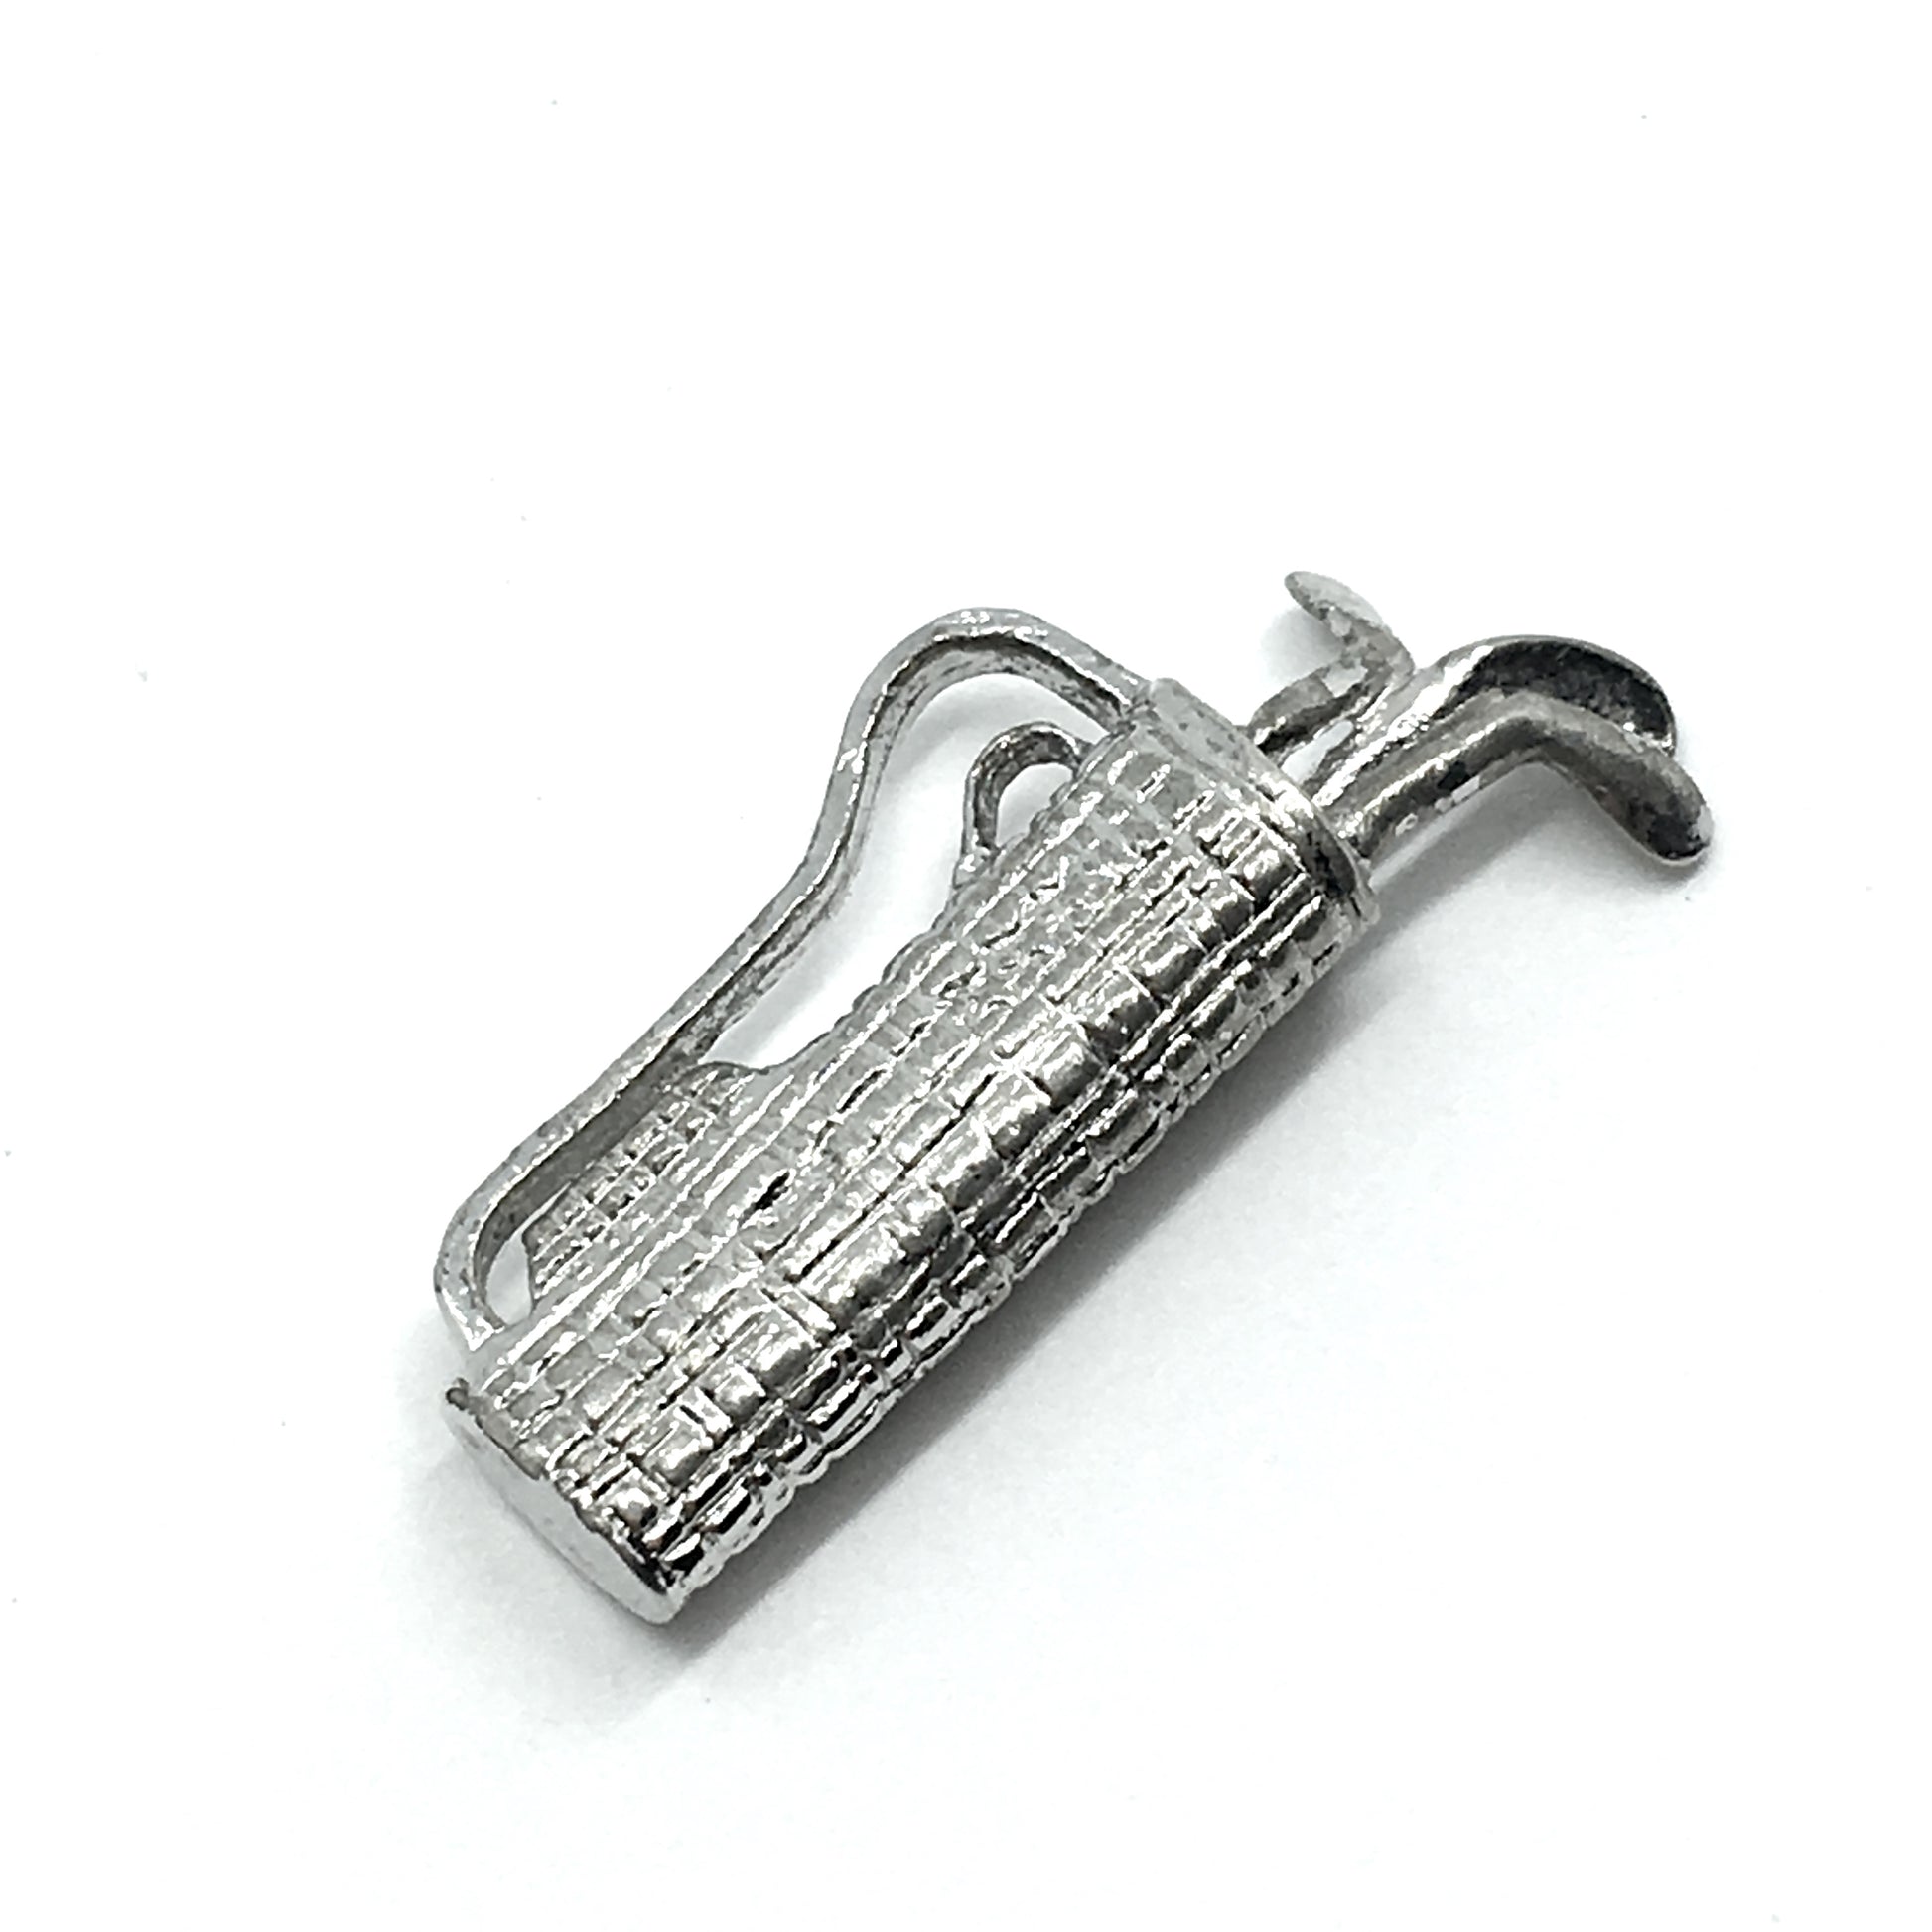 Silver Charms | Sterling Silver Golf Clubs & Bag Pendant | Shop Discount Vintage Jewelry Online